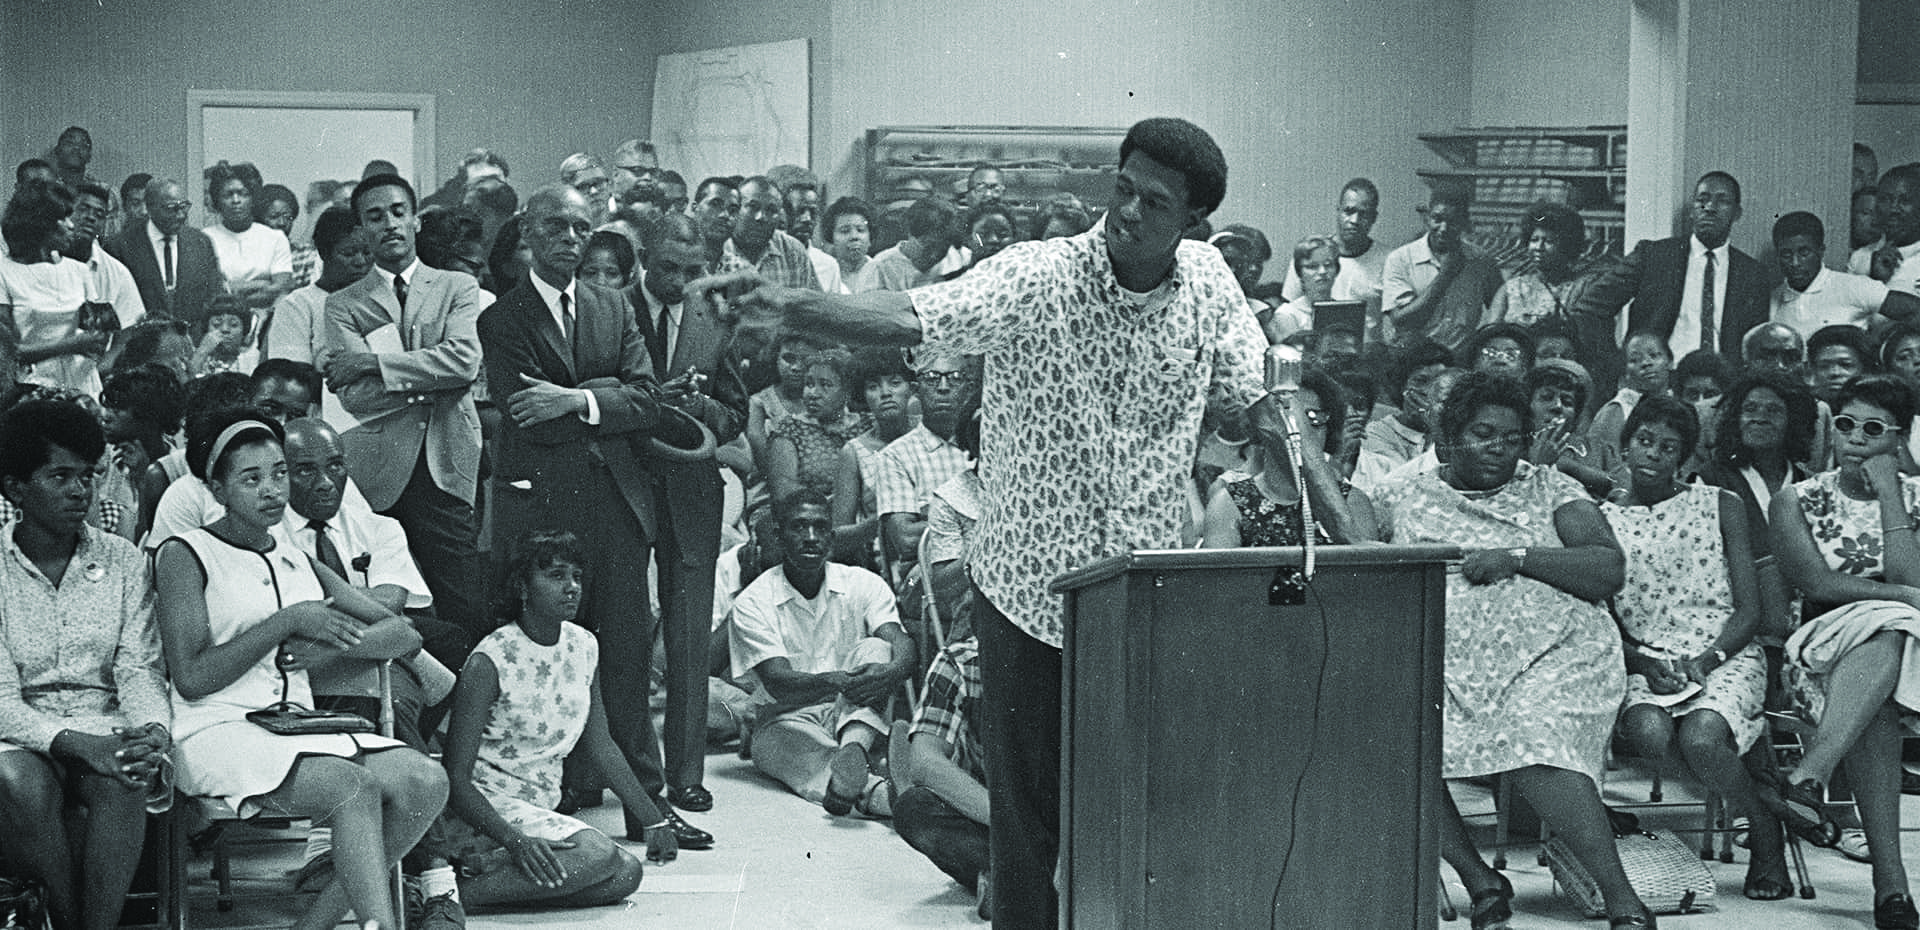 In 1967, the City decided to build a new public housing project on Bacon Street in majority-Black southeast Durham. The decision sparked an outcry and residents demanded that the City also construct public housing in white areas of town. The City soon canceled the Bacon Street project. Community organizer Howard Fuller is pictured here speaking at a City Council meeting packed with many other committed advocates. Courtesy Durham Herald Co. Newspaper, North Carolina Collection, Louis Round Wilson Special Collections Library, University of North Carolina at Chapel Hill